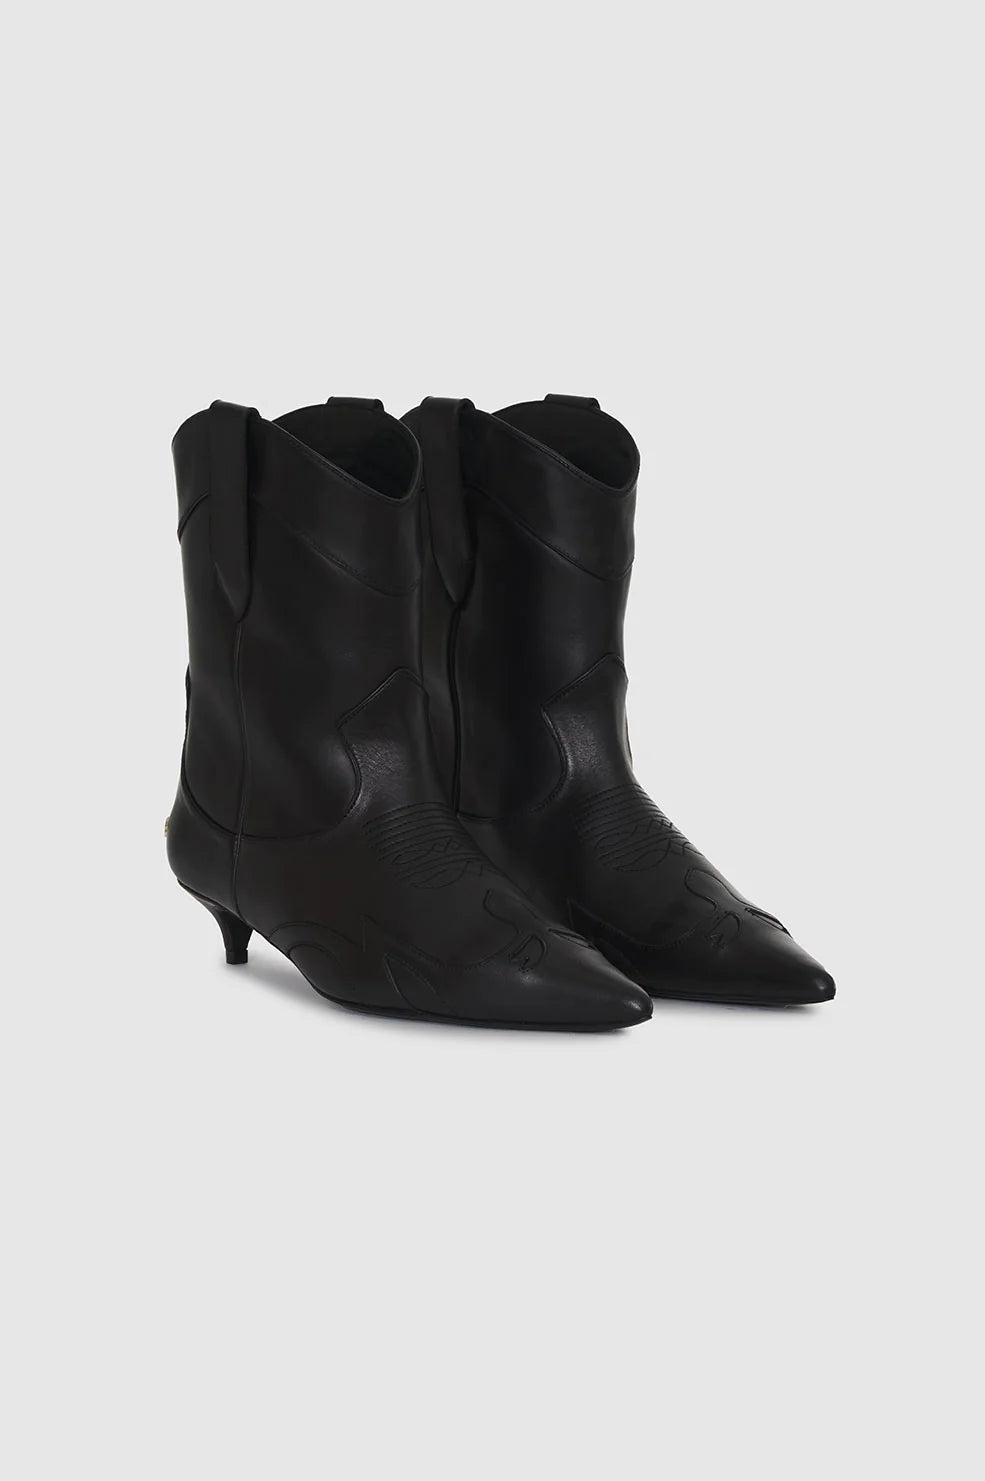 Rae Boots in Black